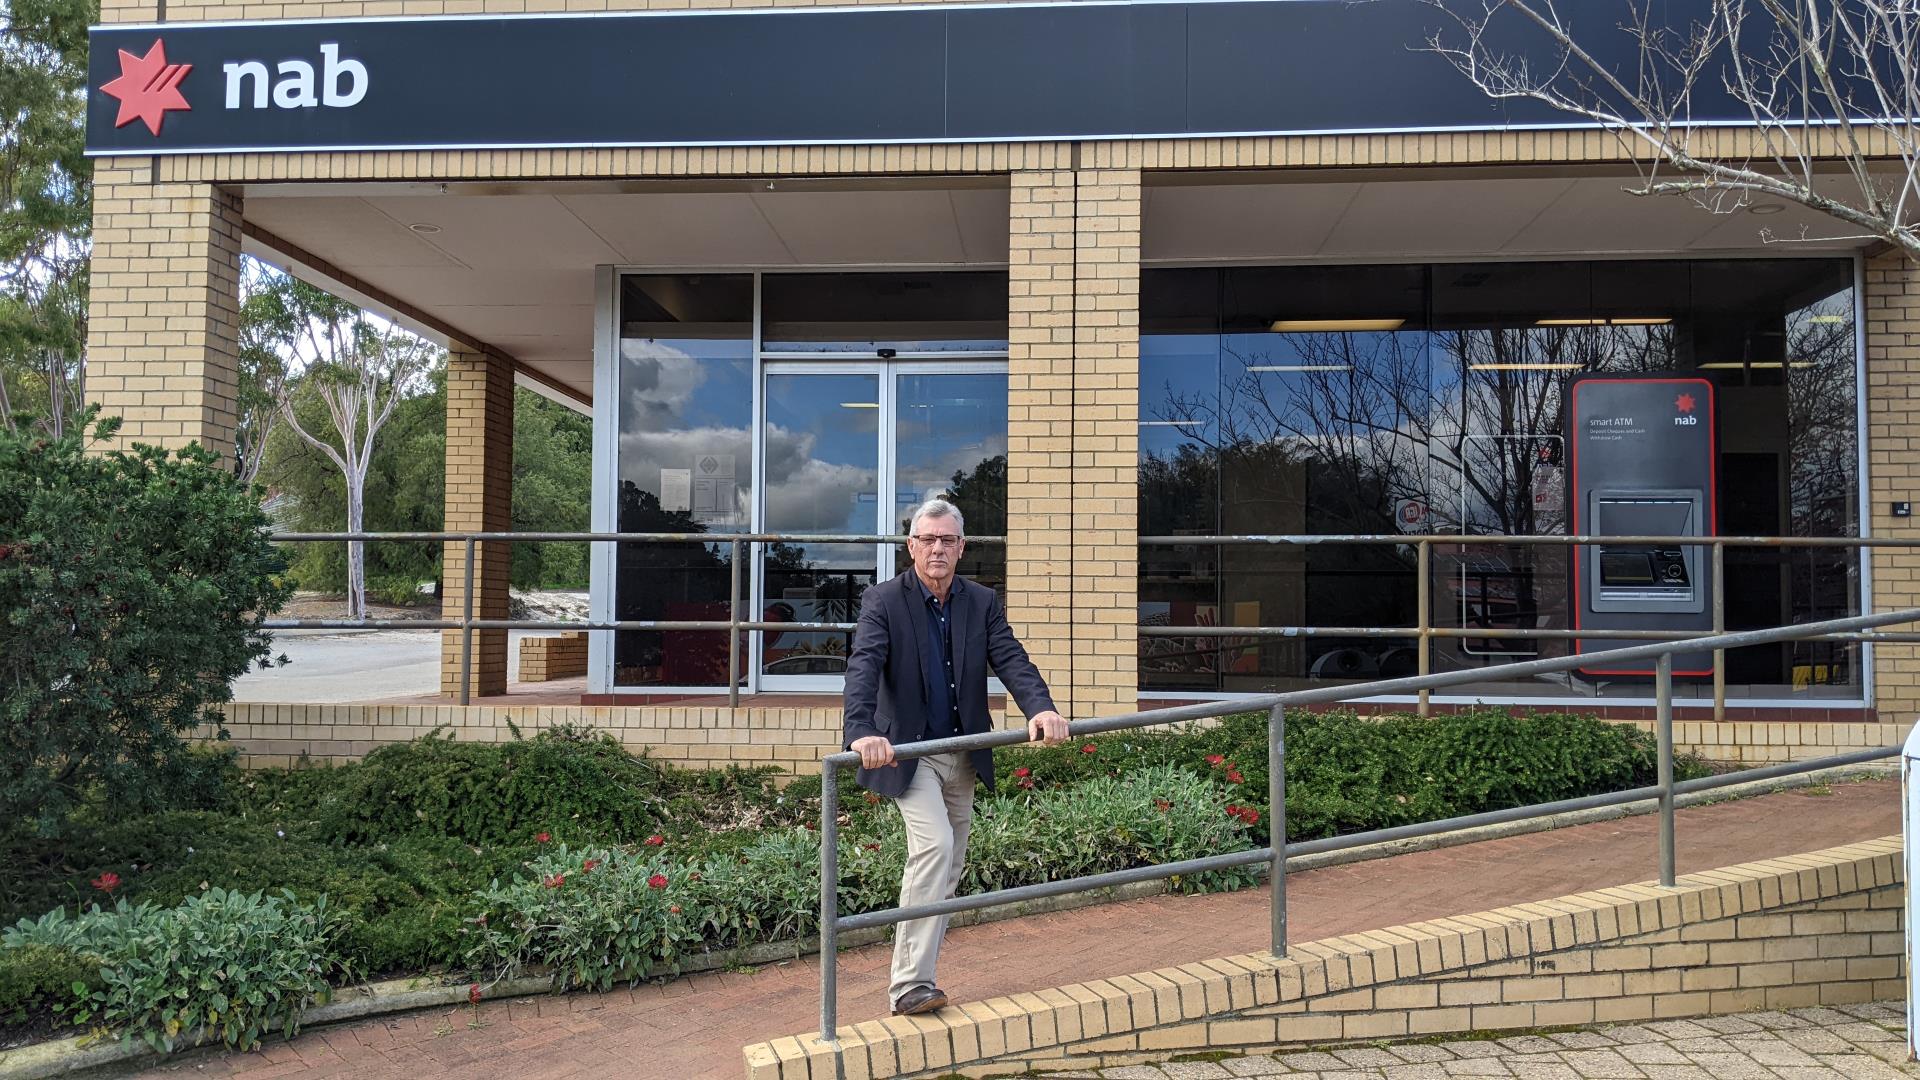 Shire of Waroona Condemns National Australia Bank's Decision to Close